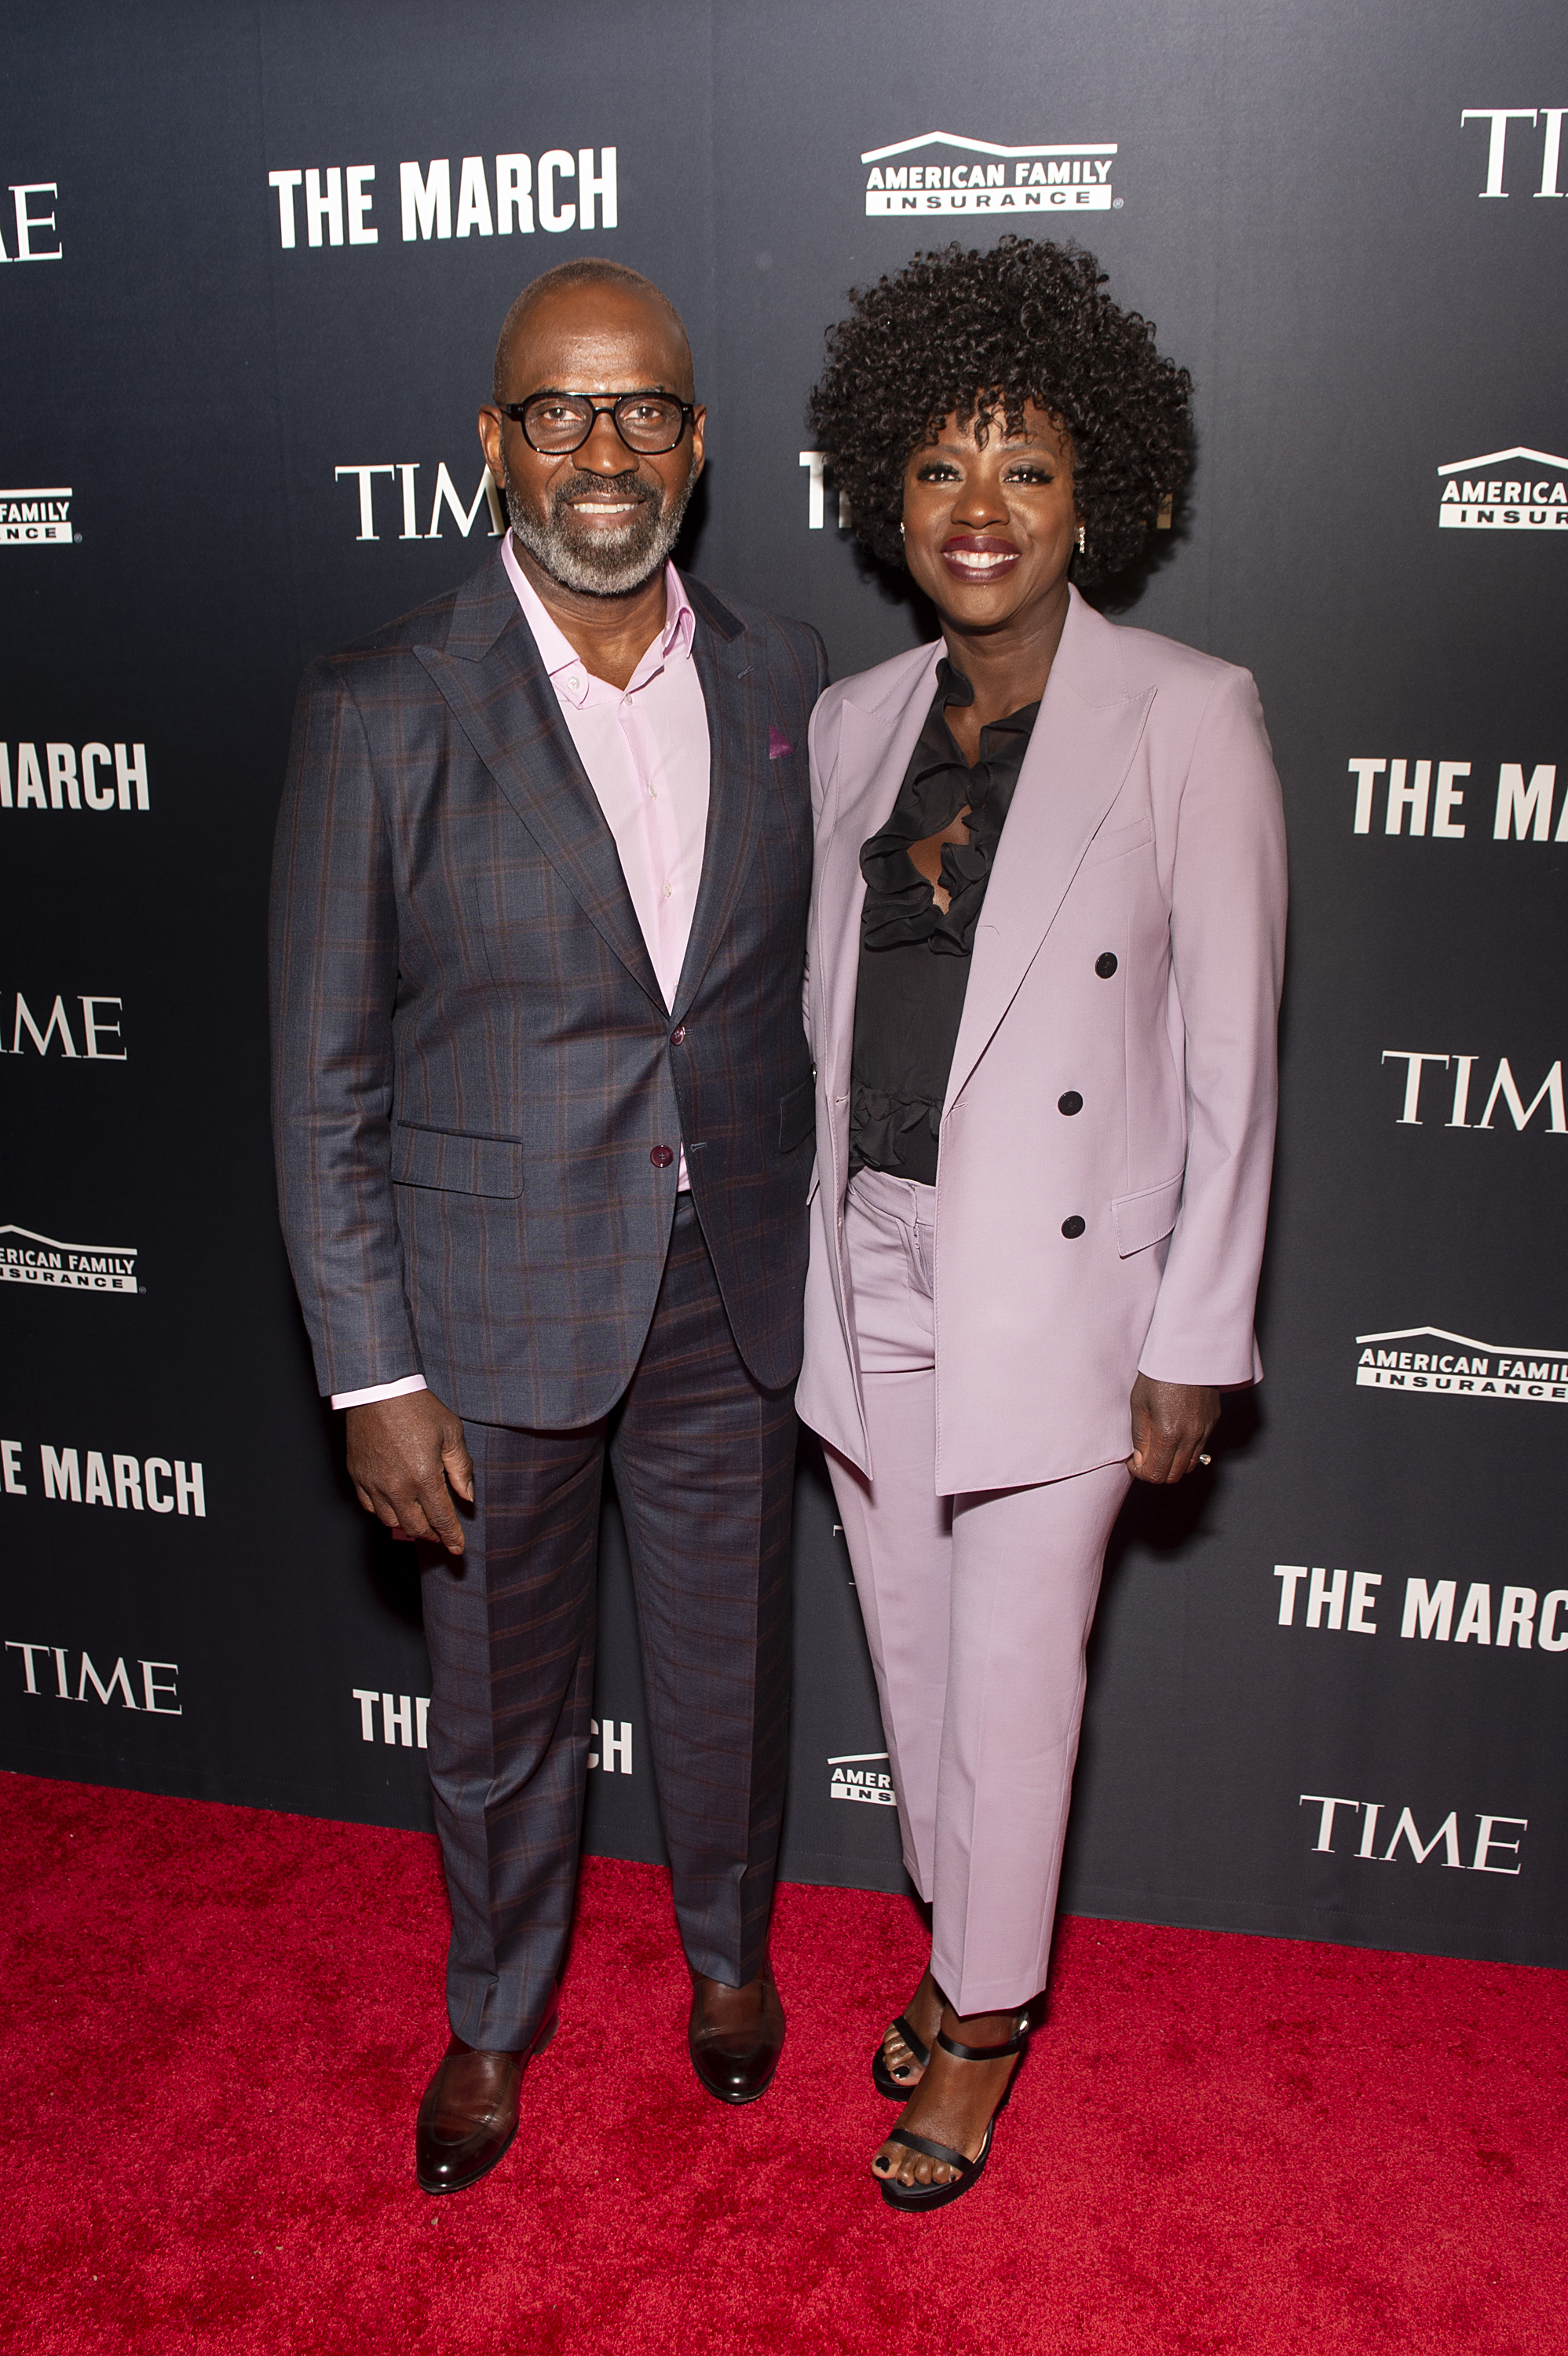 <p>In 2003, "How to Get Away with Murder" star Viola Davis married Julius Tennon, who's 13 years her senior. According to the actress, she prayed for a man in her life, and three weeks later, there he was! "I asked for a husband who was emotionally available, someone who was older, someone who maybe had a family before," she told Essence magazine in 2013. "I like older men. Someone from the South. Someone who loves God more than he loves himself." Viola and Julius have been happily married since 2003! They share daughter Genesis.</p>